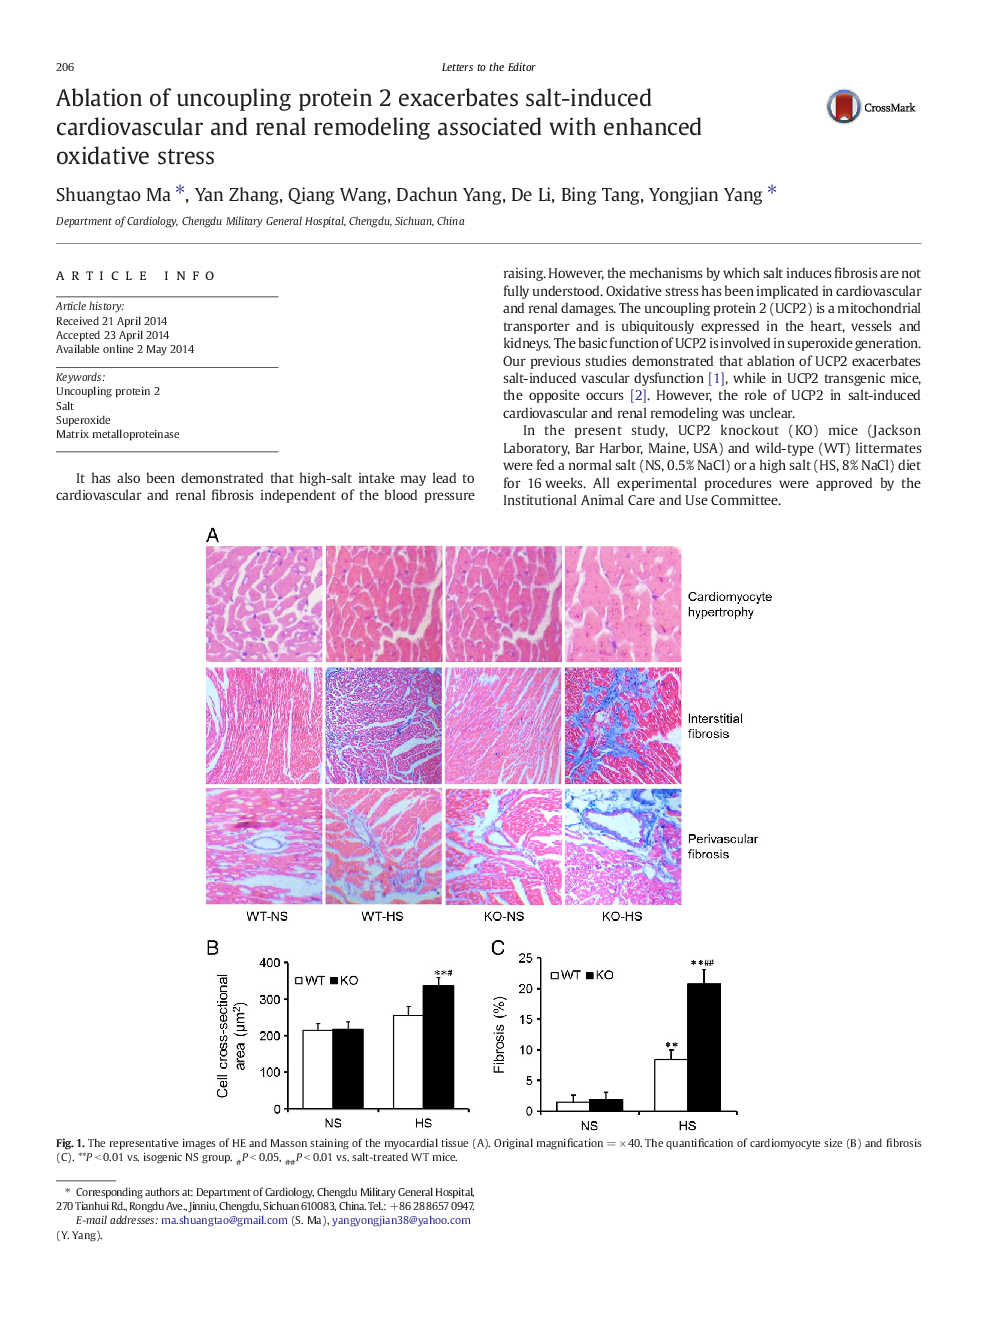 Ablation of uncoupling protein 2 exacerbates salt-induced cardiovascular and renal remodeling associated with enhanced oxidative stress